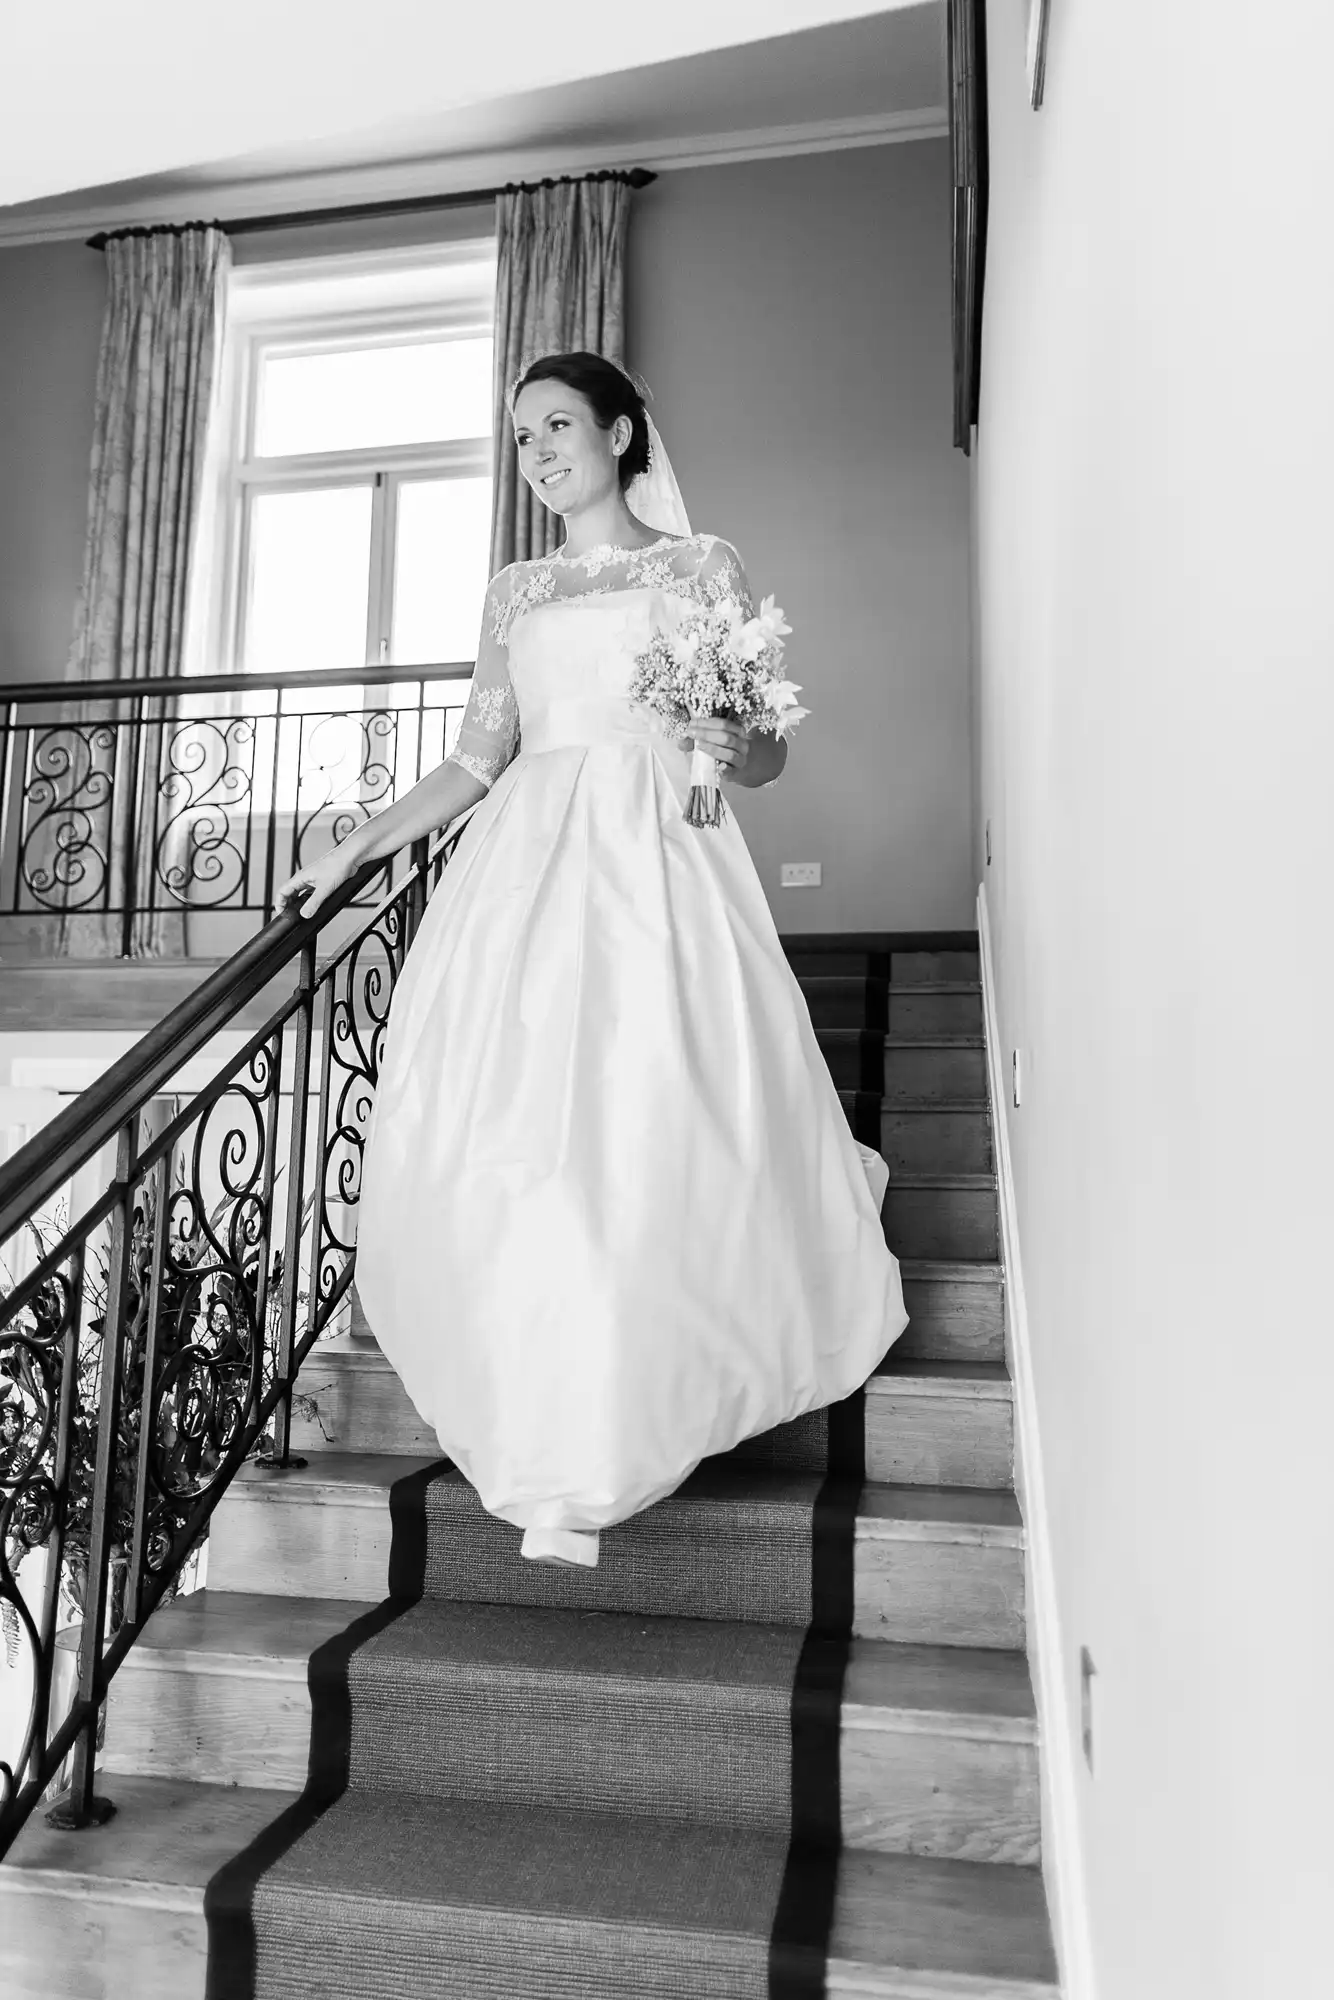 A bride in a traditional white dress holding a bouquet smiles as she descends a staircase in a well-lit room.